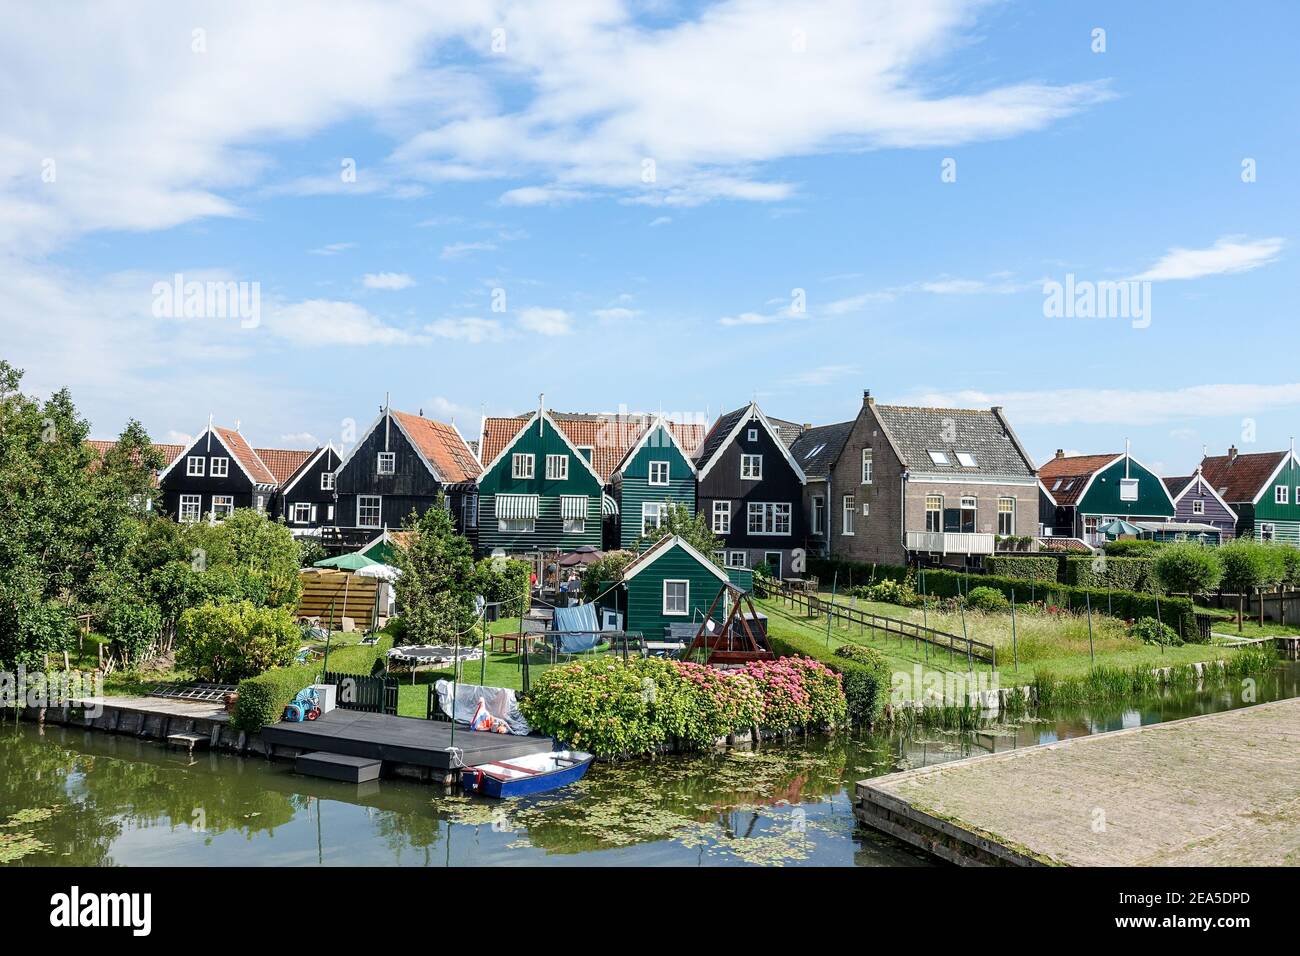 Typical Dutch houses in the quaint village and port of Marken, North Holland, Netherlands Stock Photo